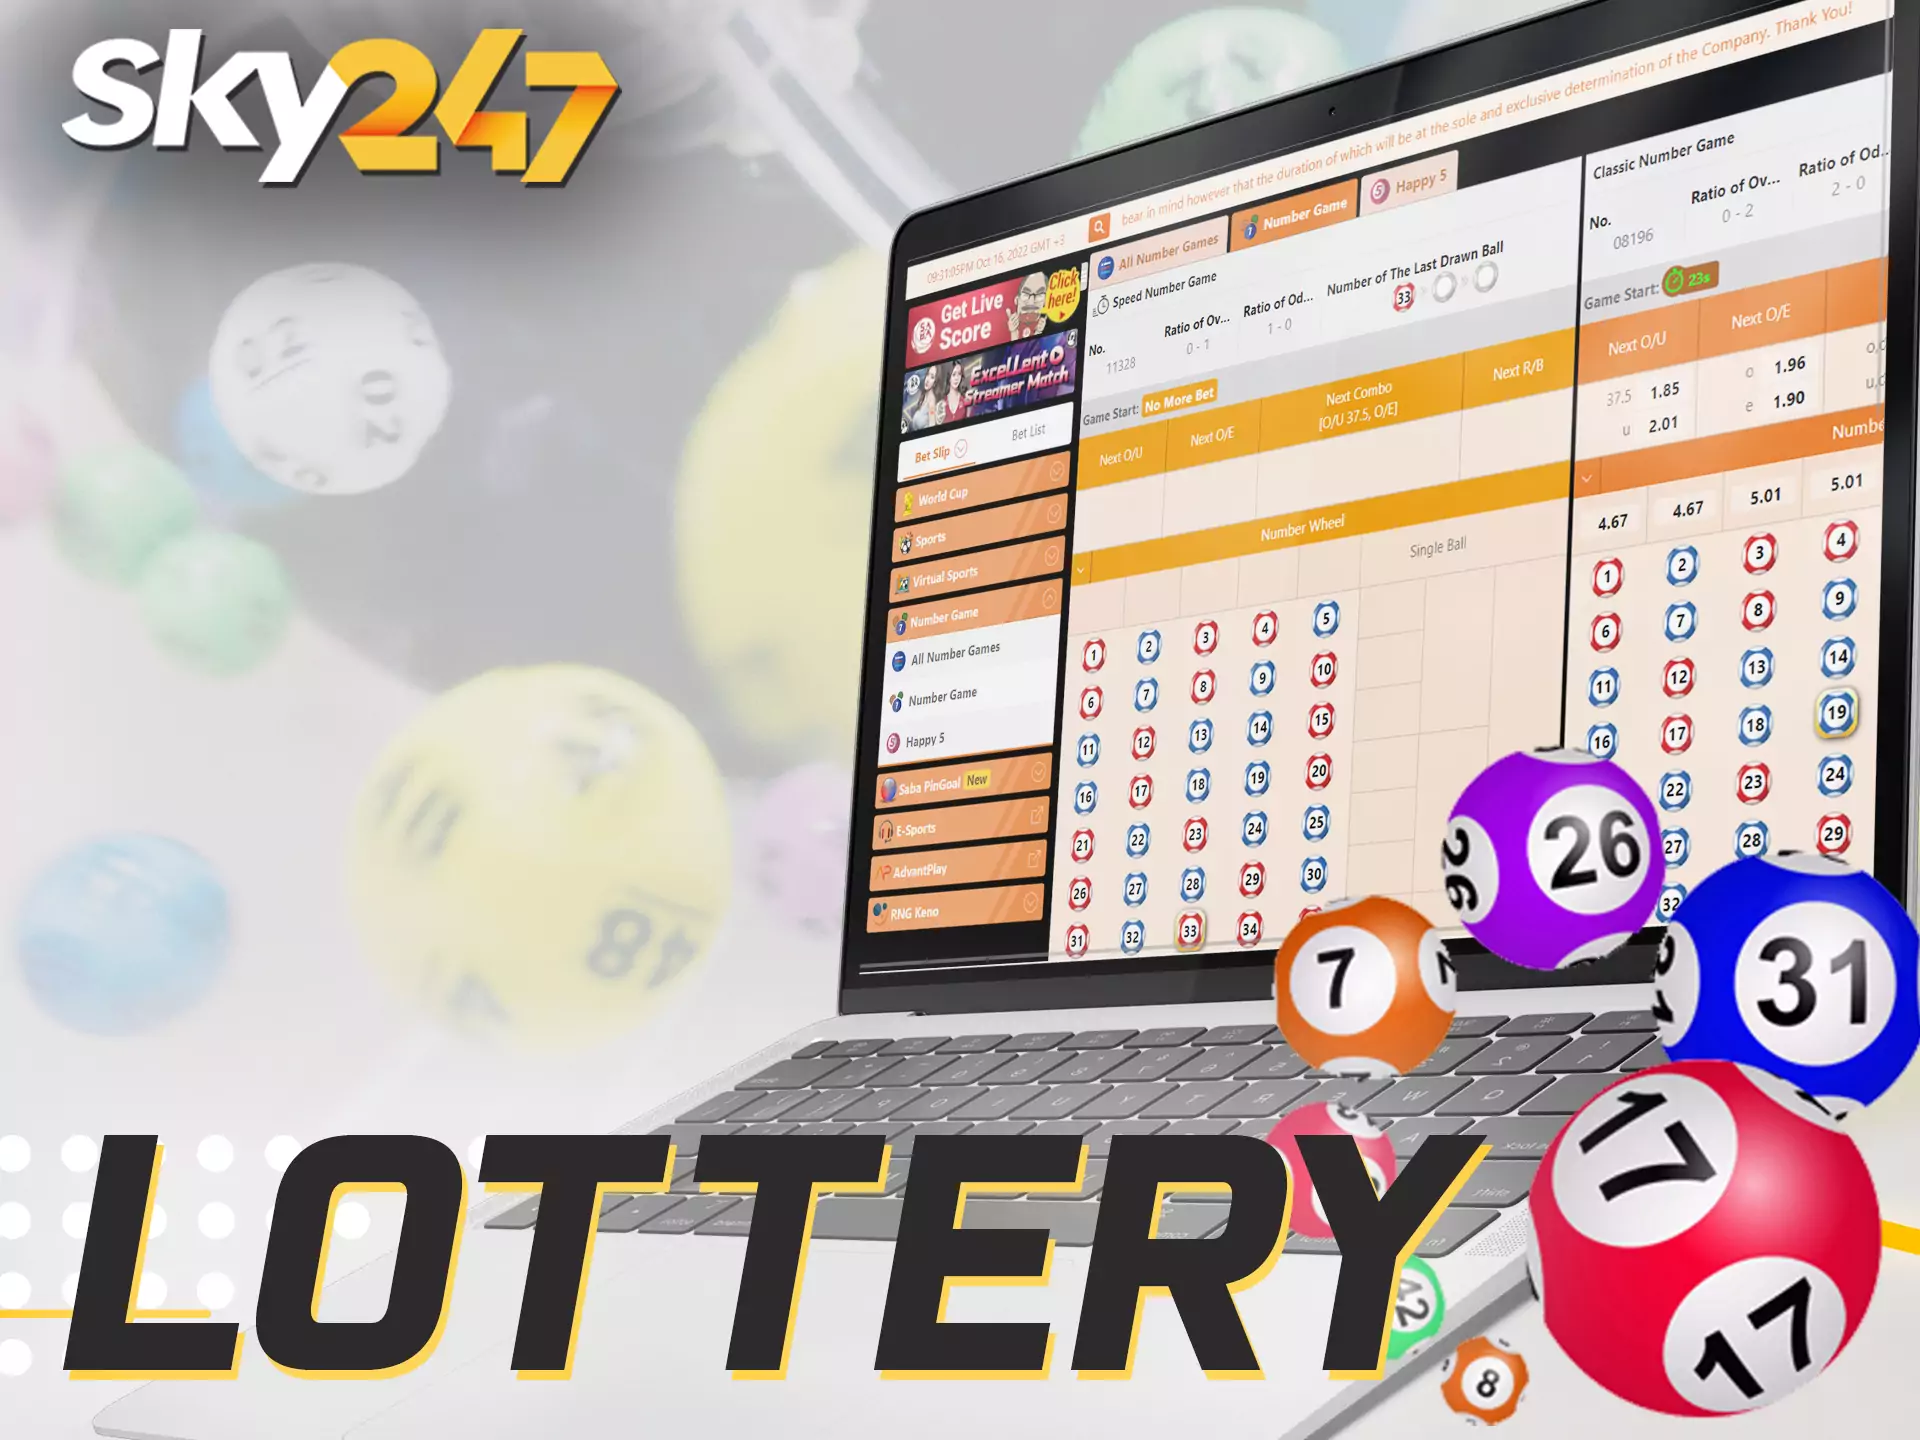 You can buy lottery tickets on the Sky247 website.